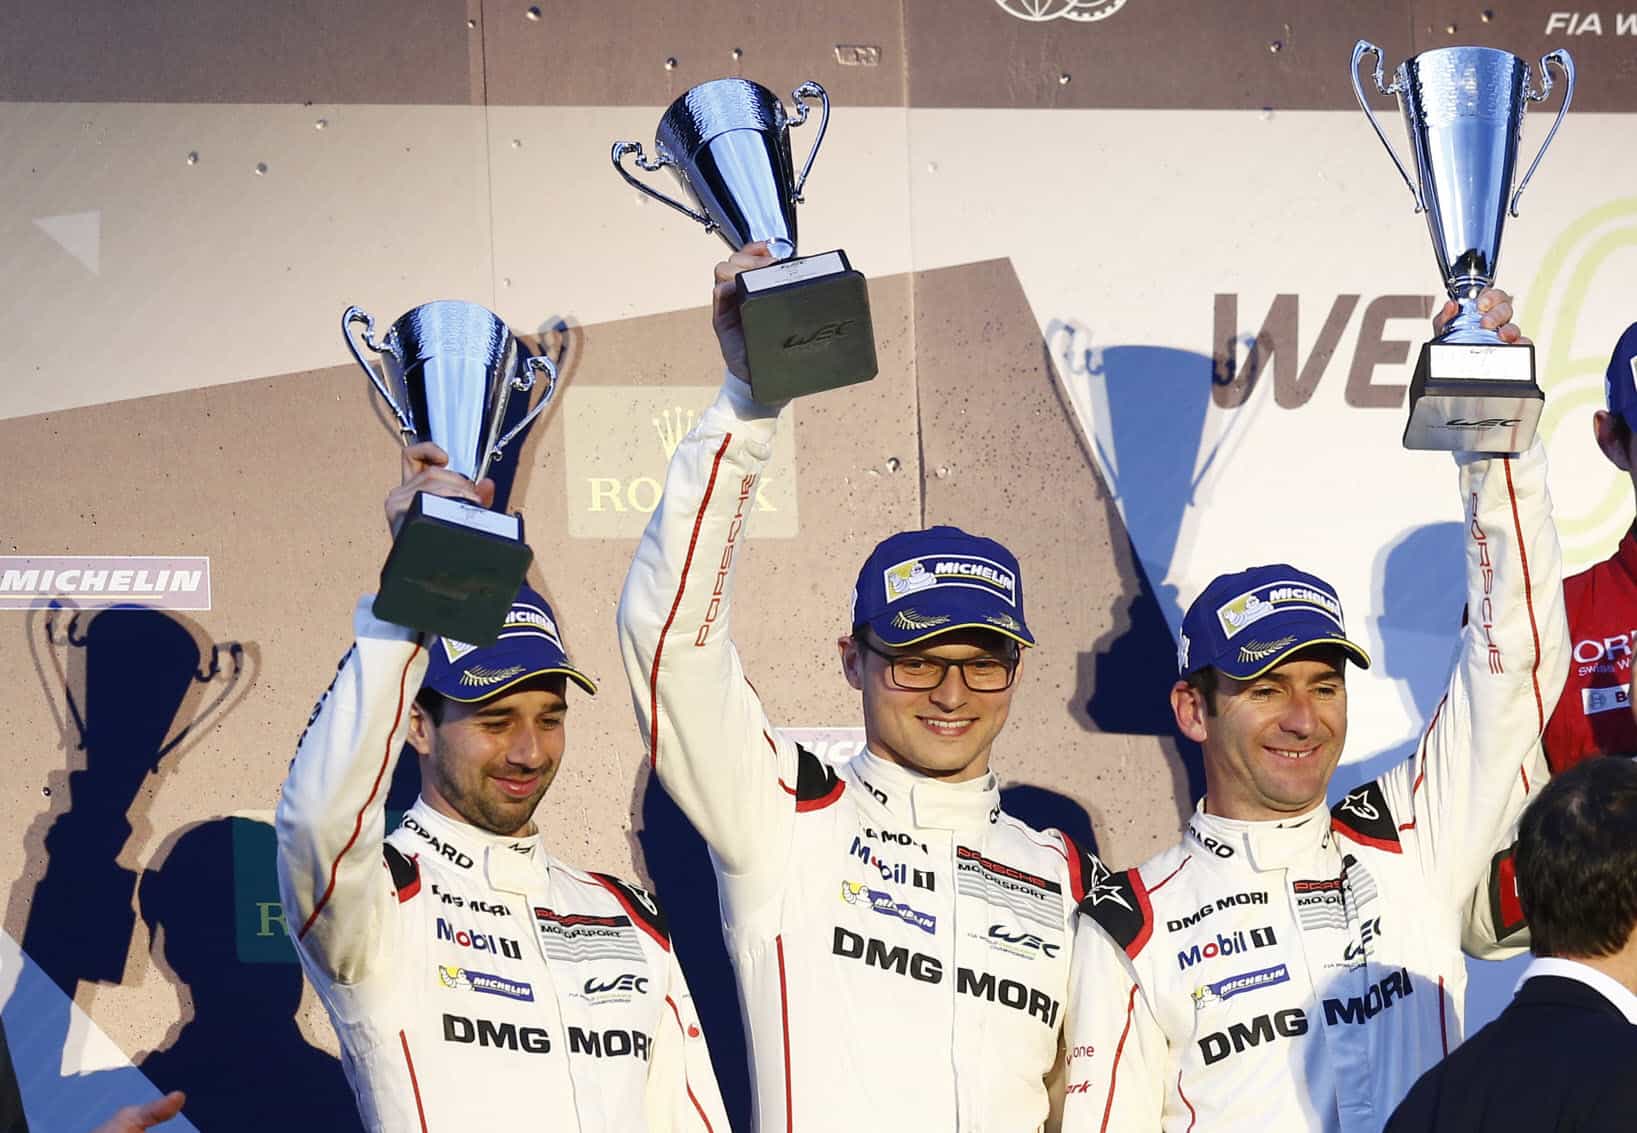 Porsche takes second place at Spa-Francorchamps